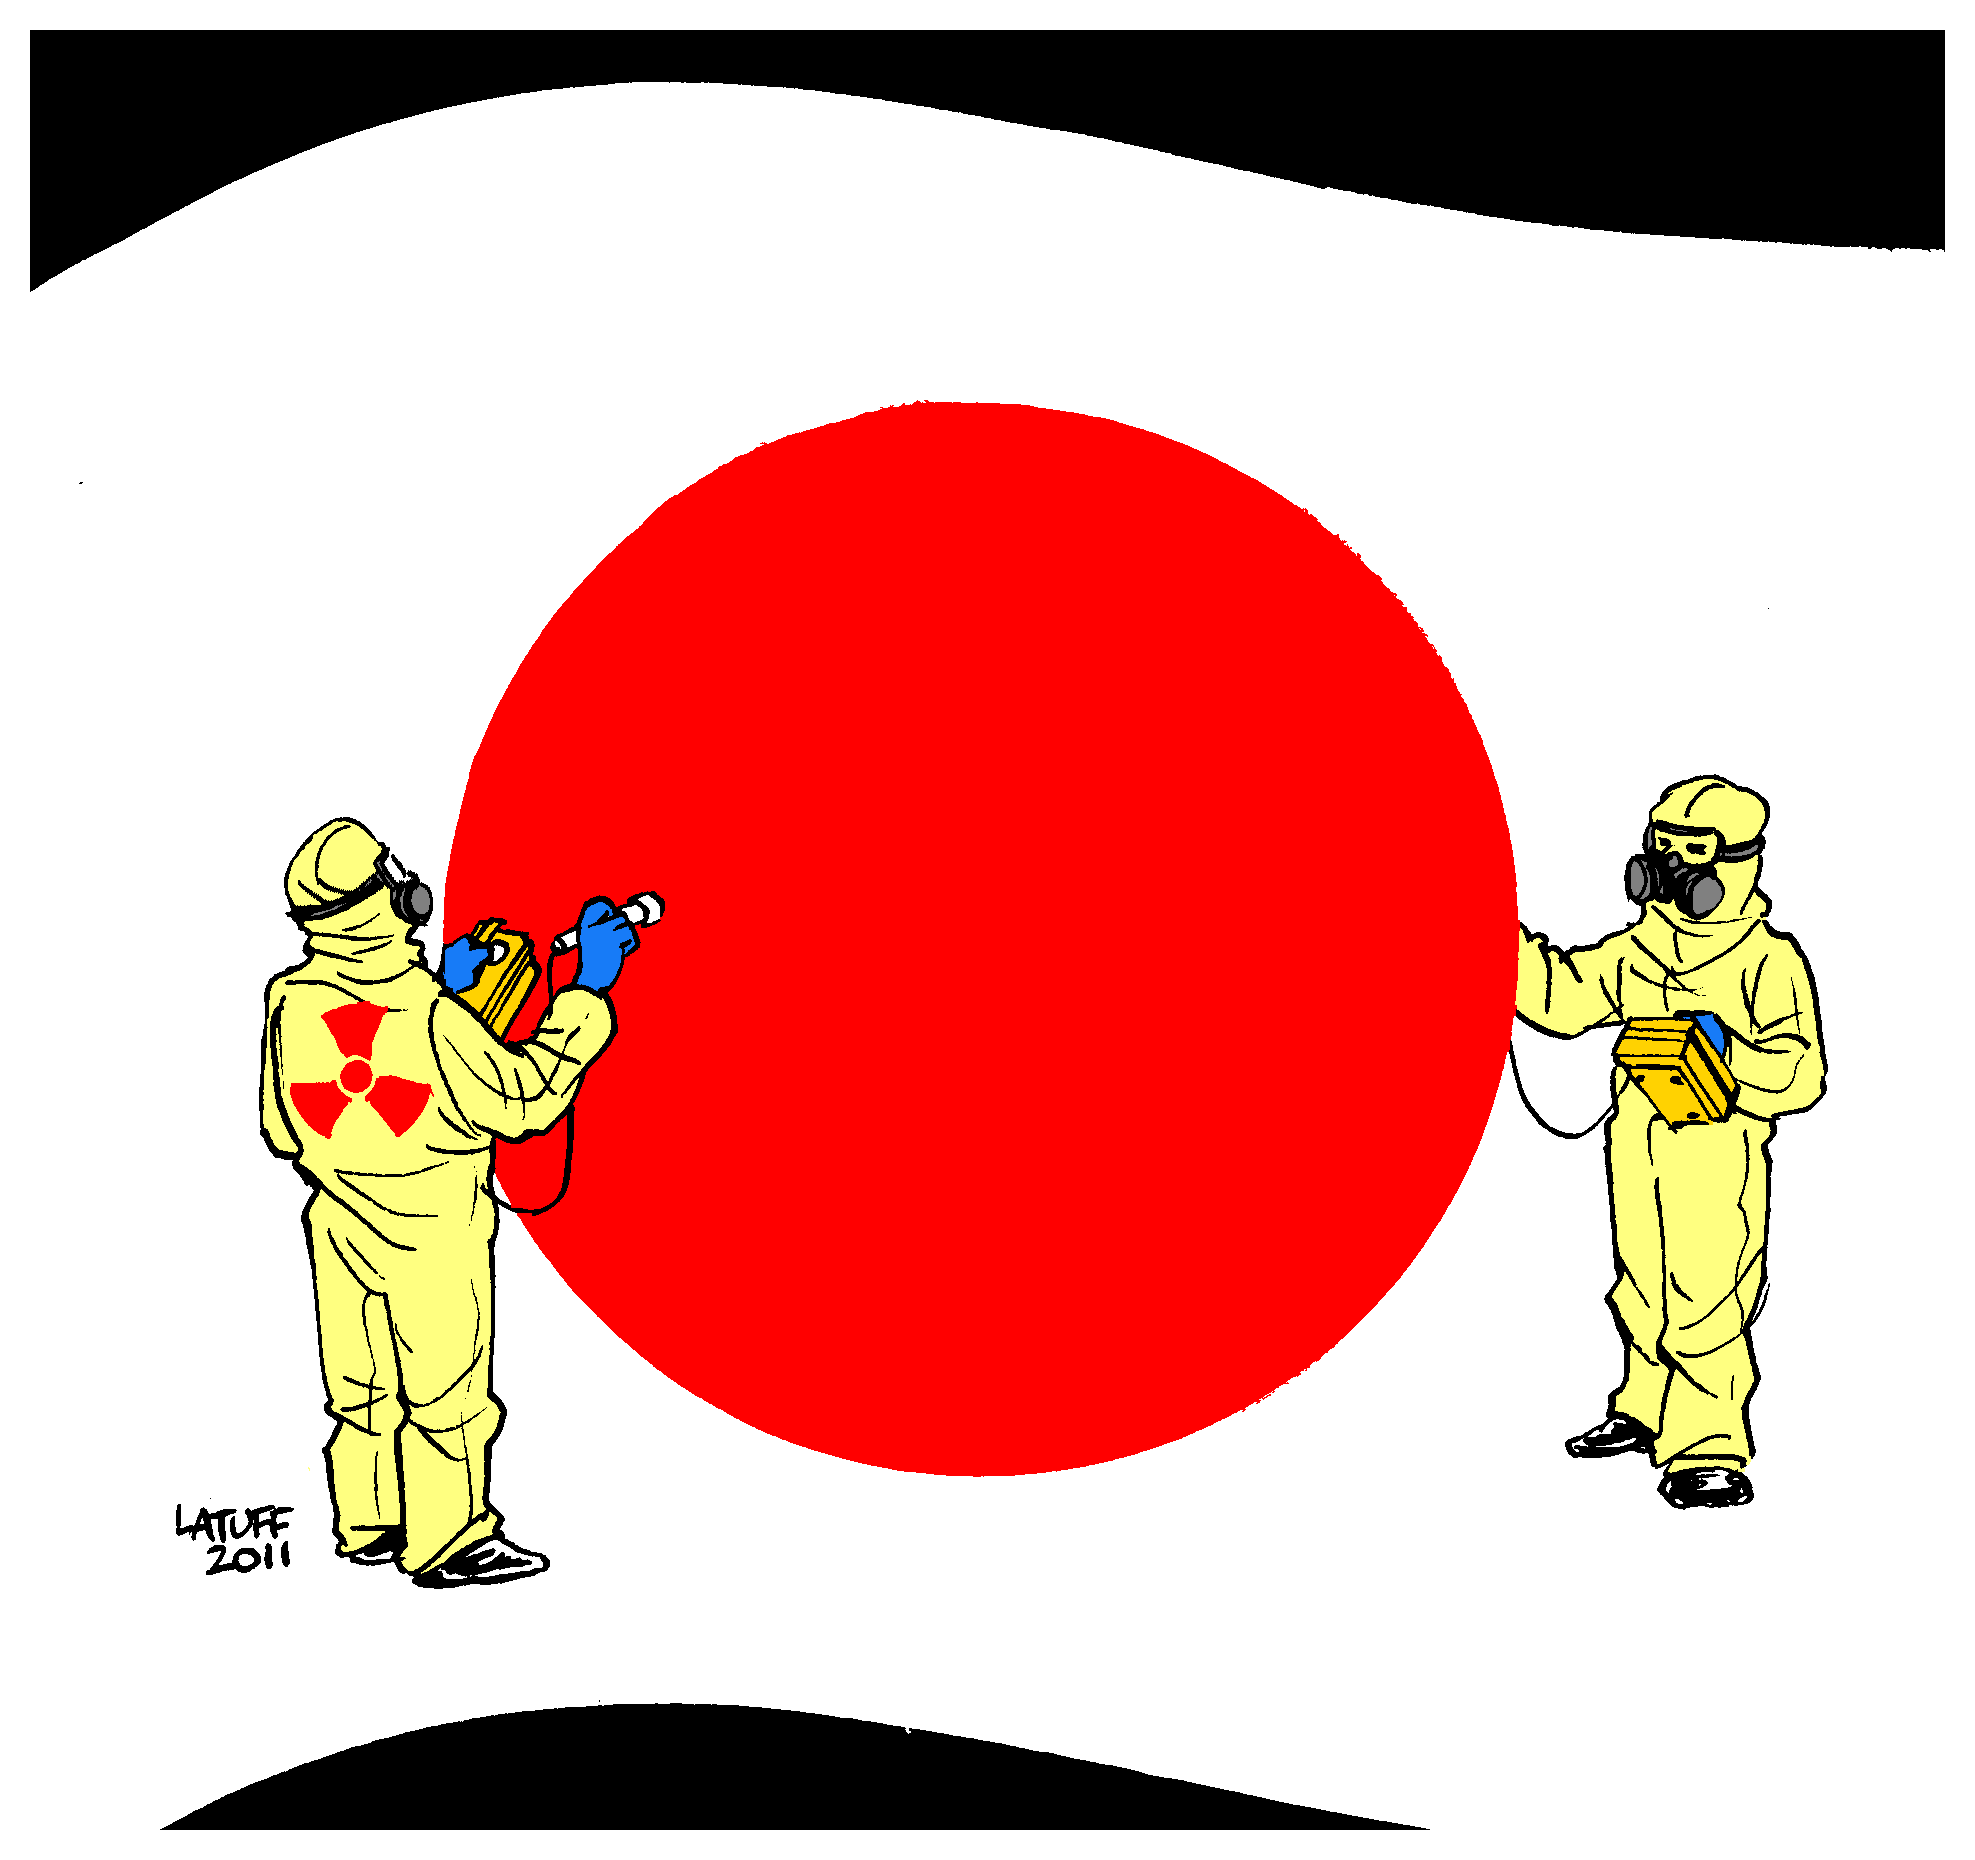 Turning Japan into the Land of the Burning Sun